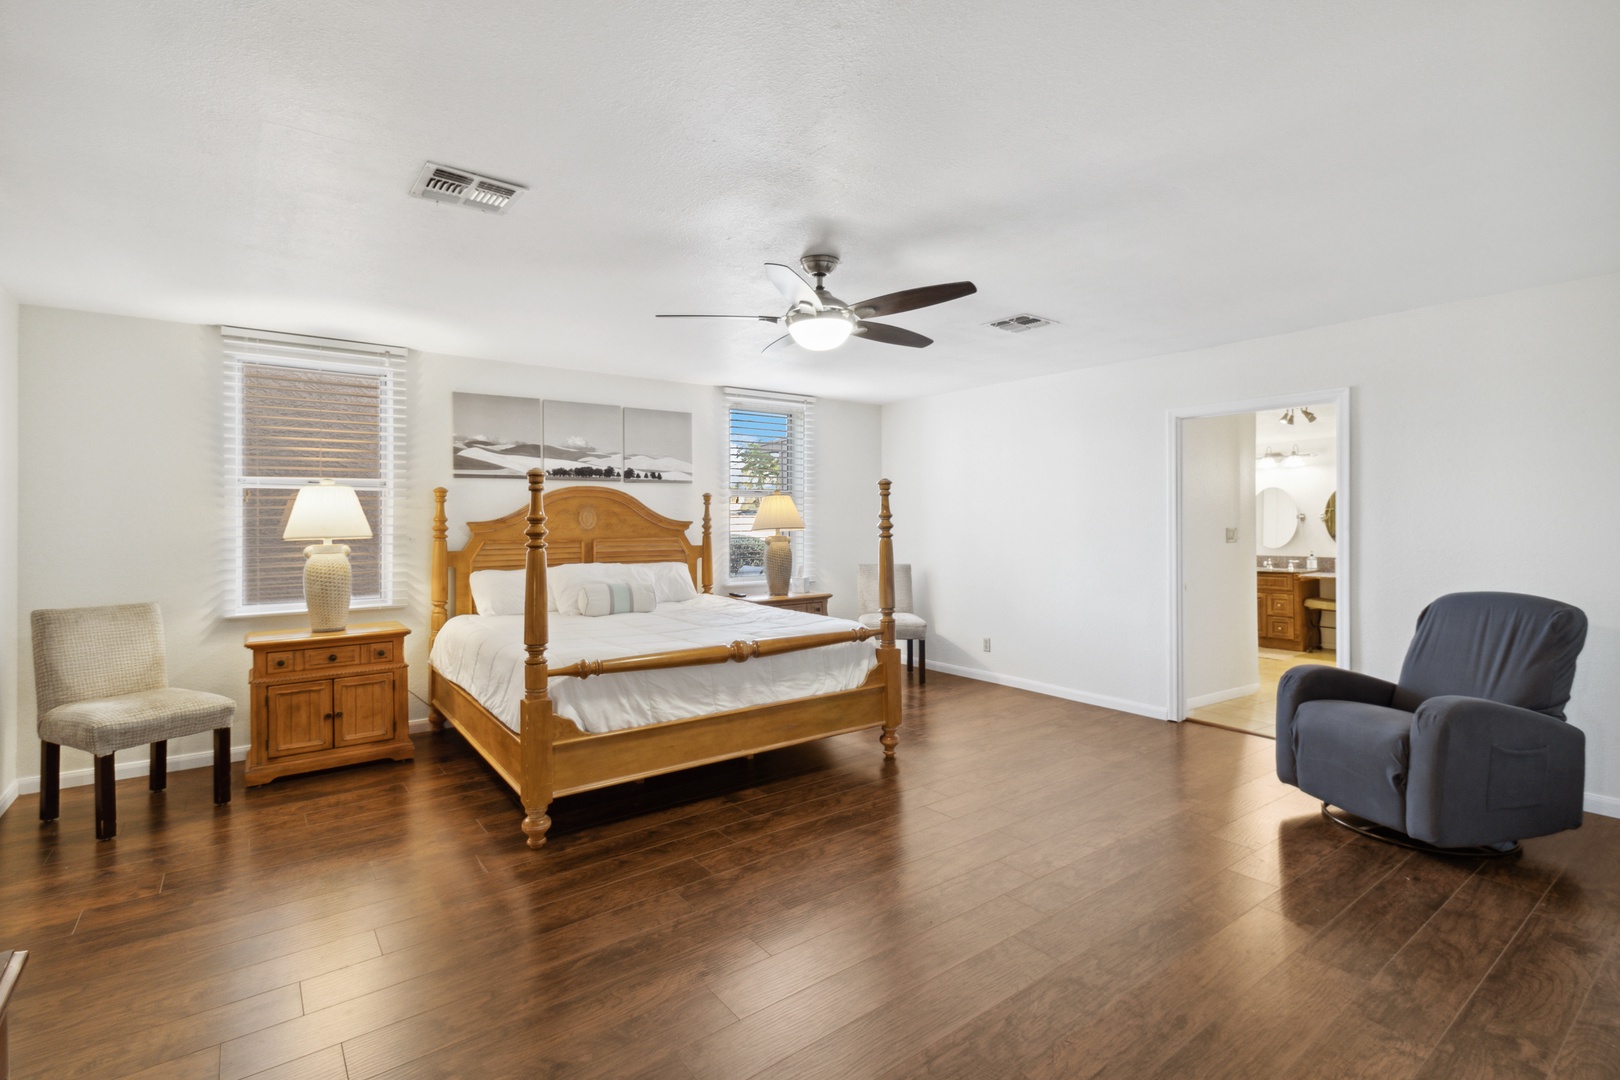 Scottsdale Vacation Rentals, OFB Thunderbird Retreat - Bedroom with King bed off living room